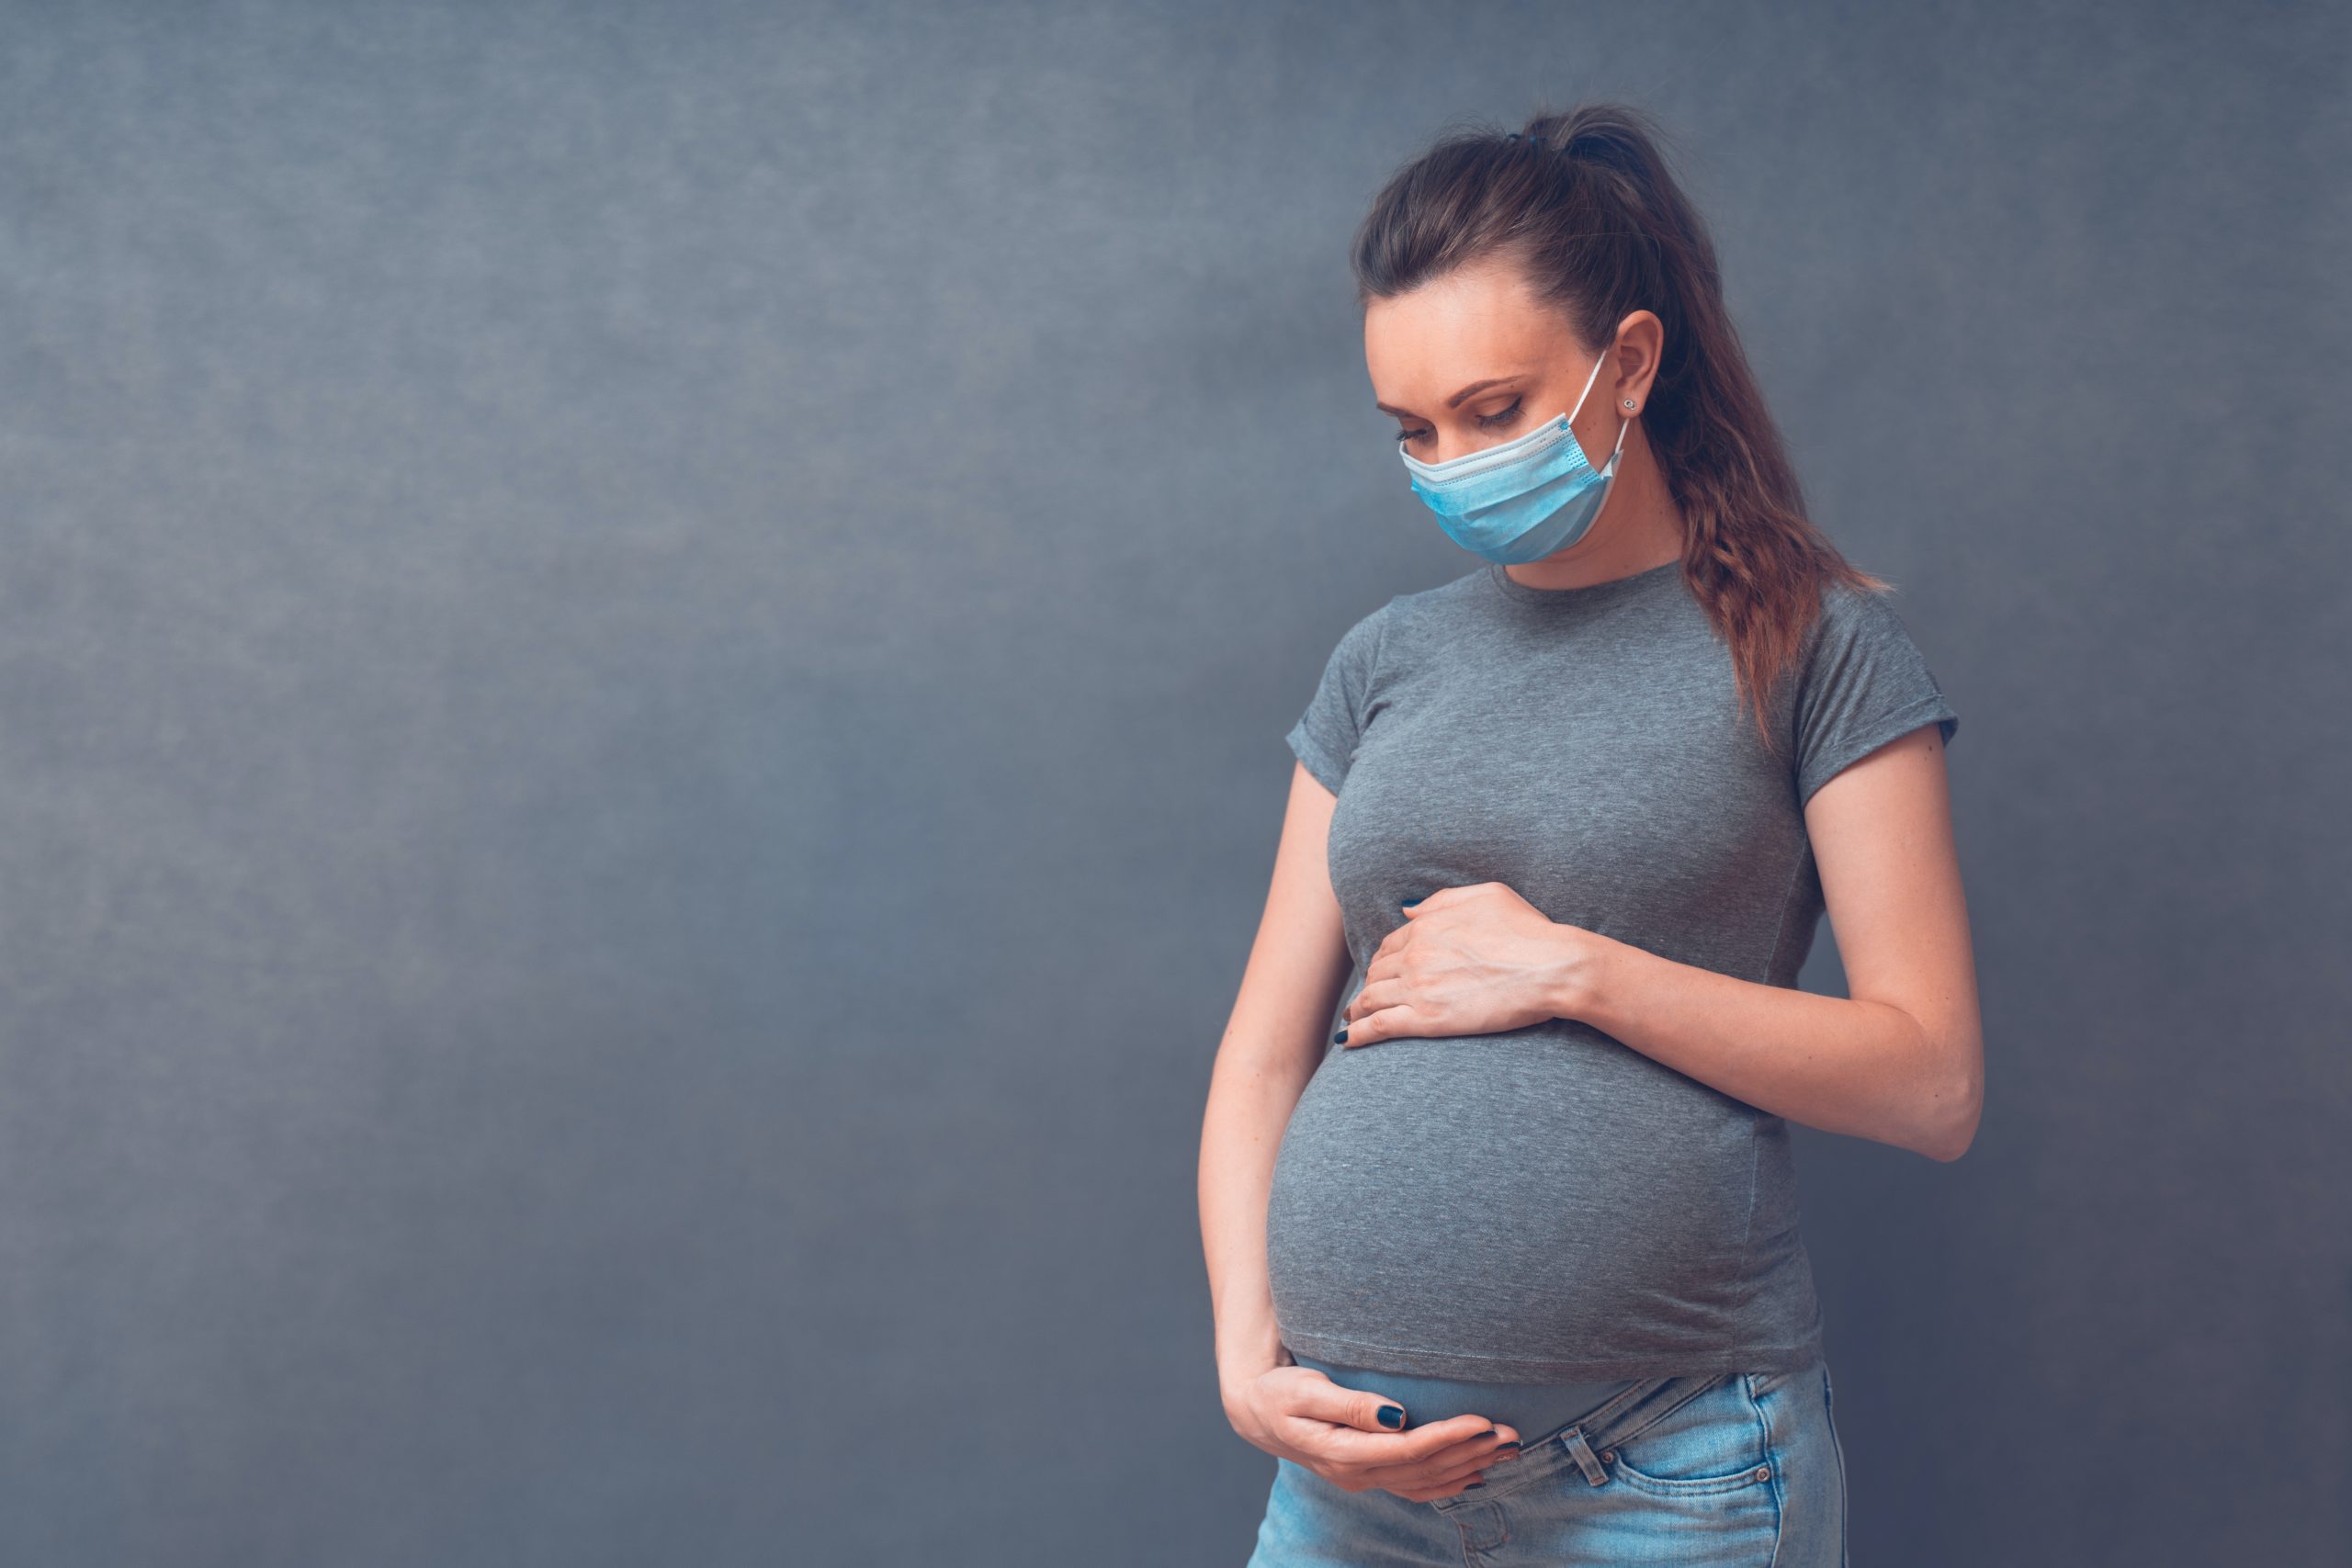 Baby infected with coronavirus in the womb – new study